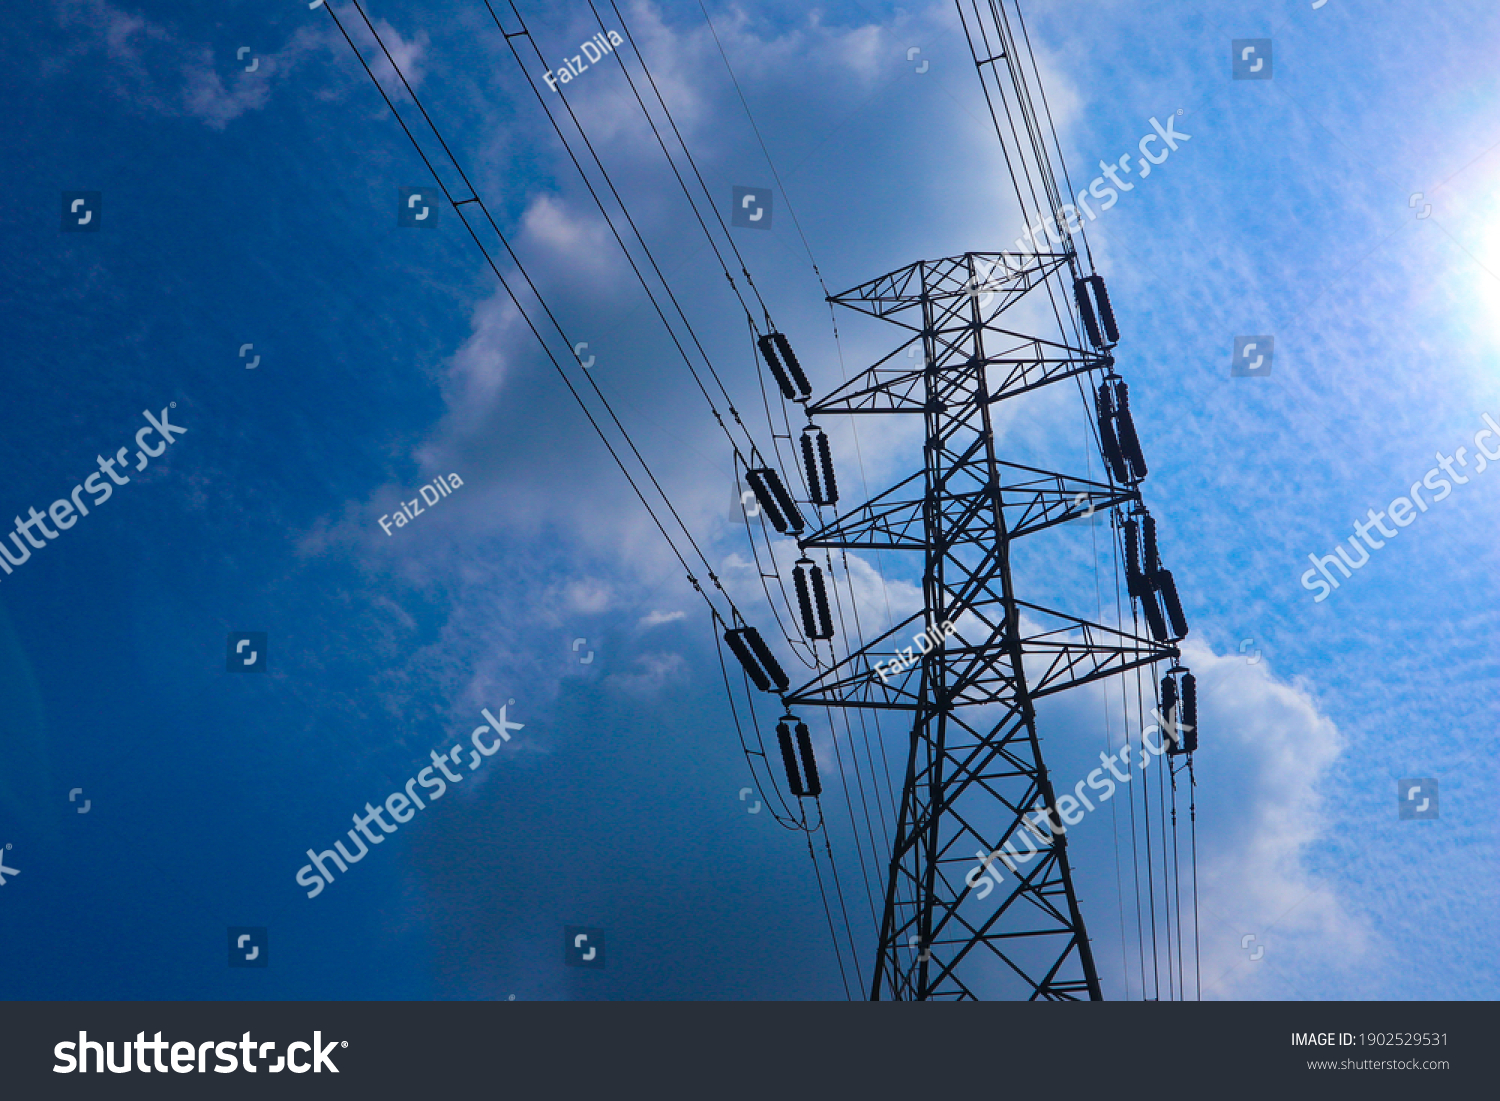  the pylon outline, Very High Voltage Power Lines (Indonesia : SUTET) on blue sky
 #1902529531